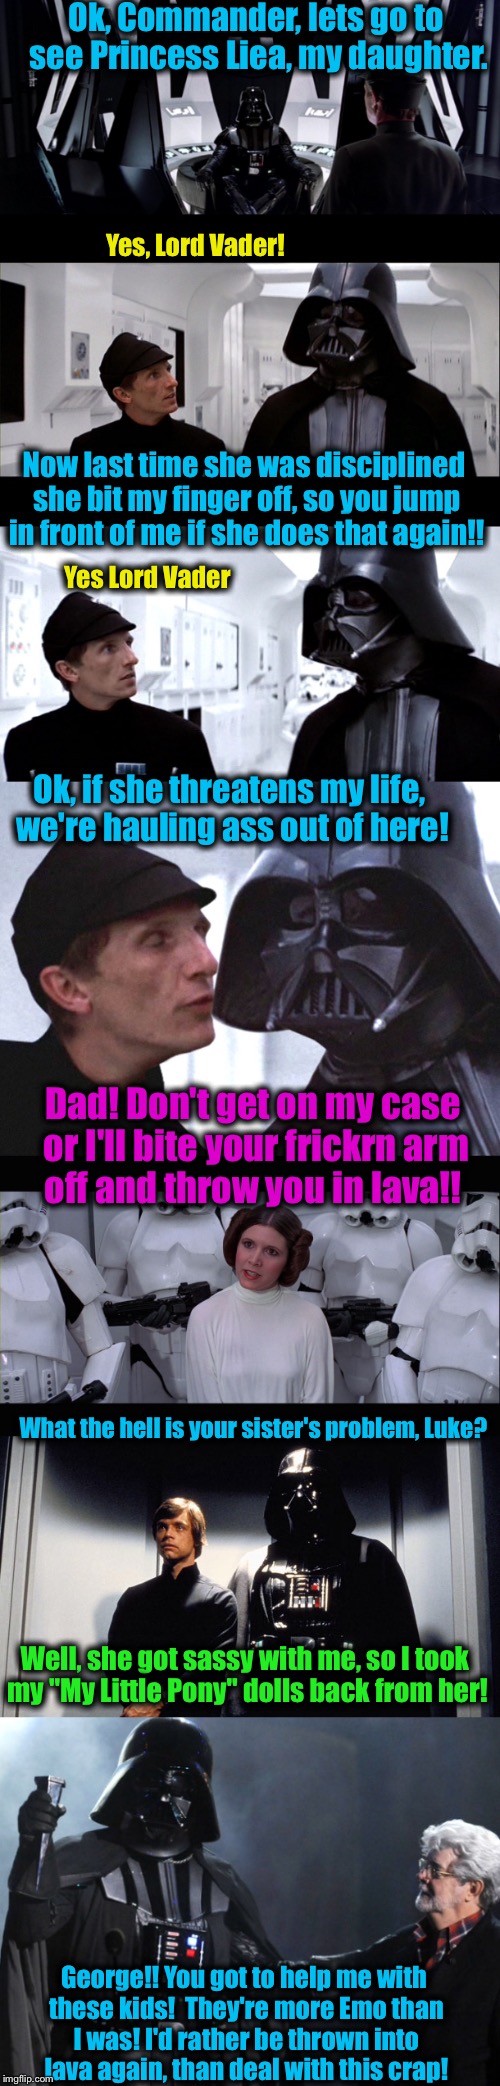 Anakin's Emo teen years come back to haunt him........ | Ok, Commander, lets go to see Princess Liea, my daughter. Yes, Lord Vader! Now last time she was disciplined she bit my finger off, so you jump in front of me if she does that again!! Yes Lord Vader; Ok, if she threatens my life, we're hauling ass out of here! Dad! Don't get on my case or I'll bite your frickrn arm off and throw you in lava!! What the hell is your sister's problem, Luke? Well, she got sassy with me, so I took my "My Little Pony" dolls back from her! George!! You got to help me with these kids!  They're more Emo than I was! I'd rather be thrown into lava again, than deal with this crap! | image tagged in darth vader luke skywalker,darth vader leia,memes,funny memes,star wars,emo | made w/ Imgflip meme maker